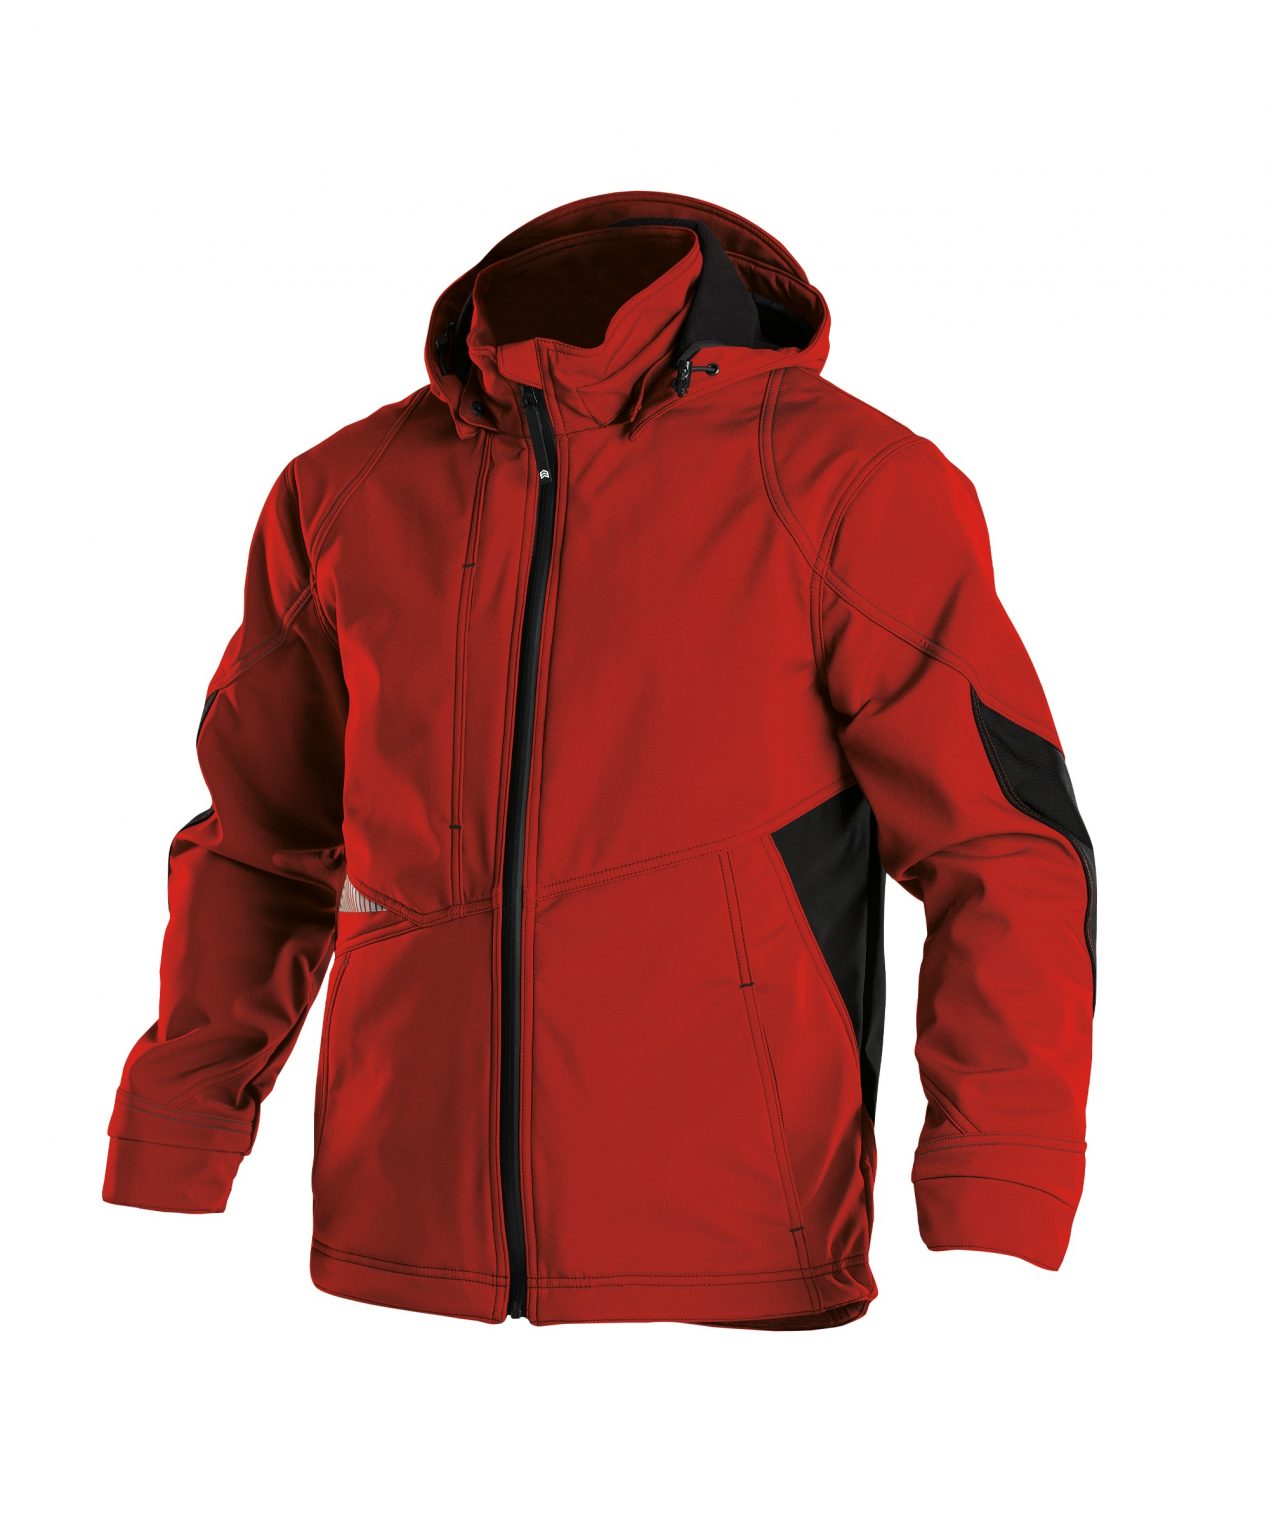 gravity softshell jacket red black front